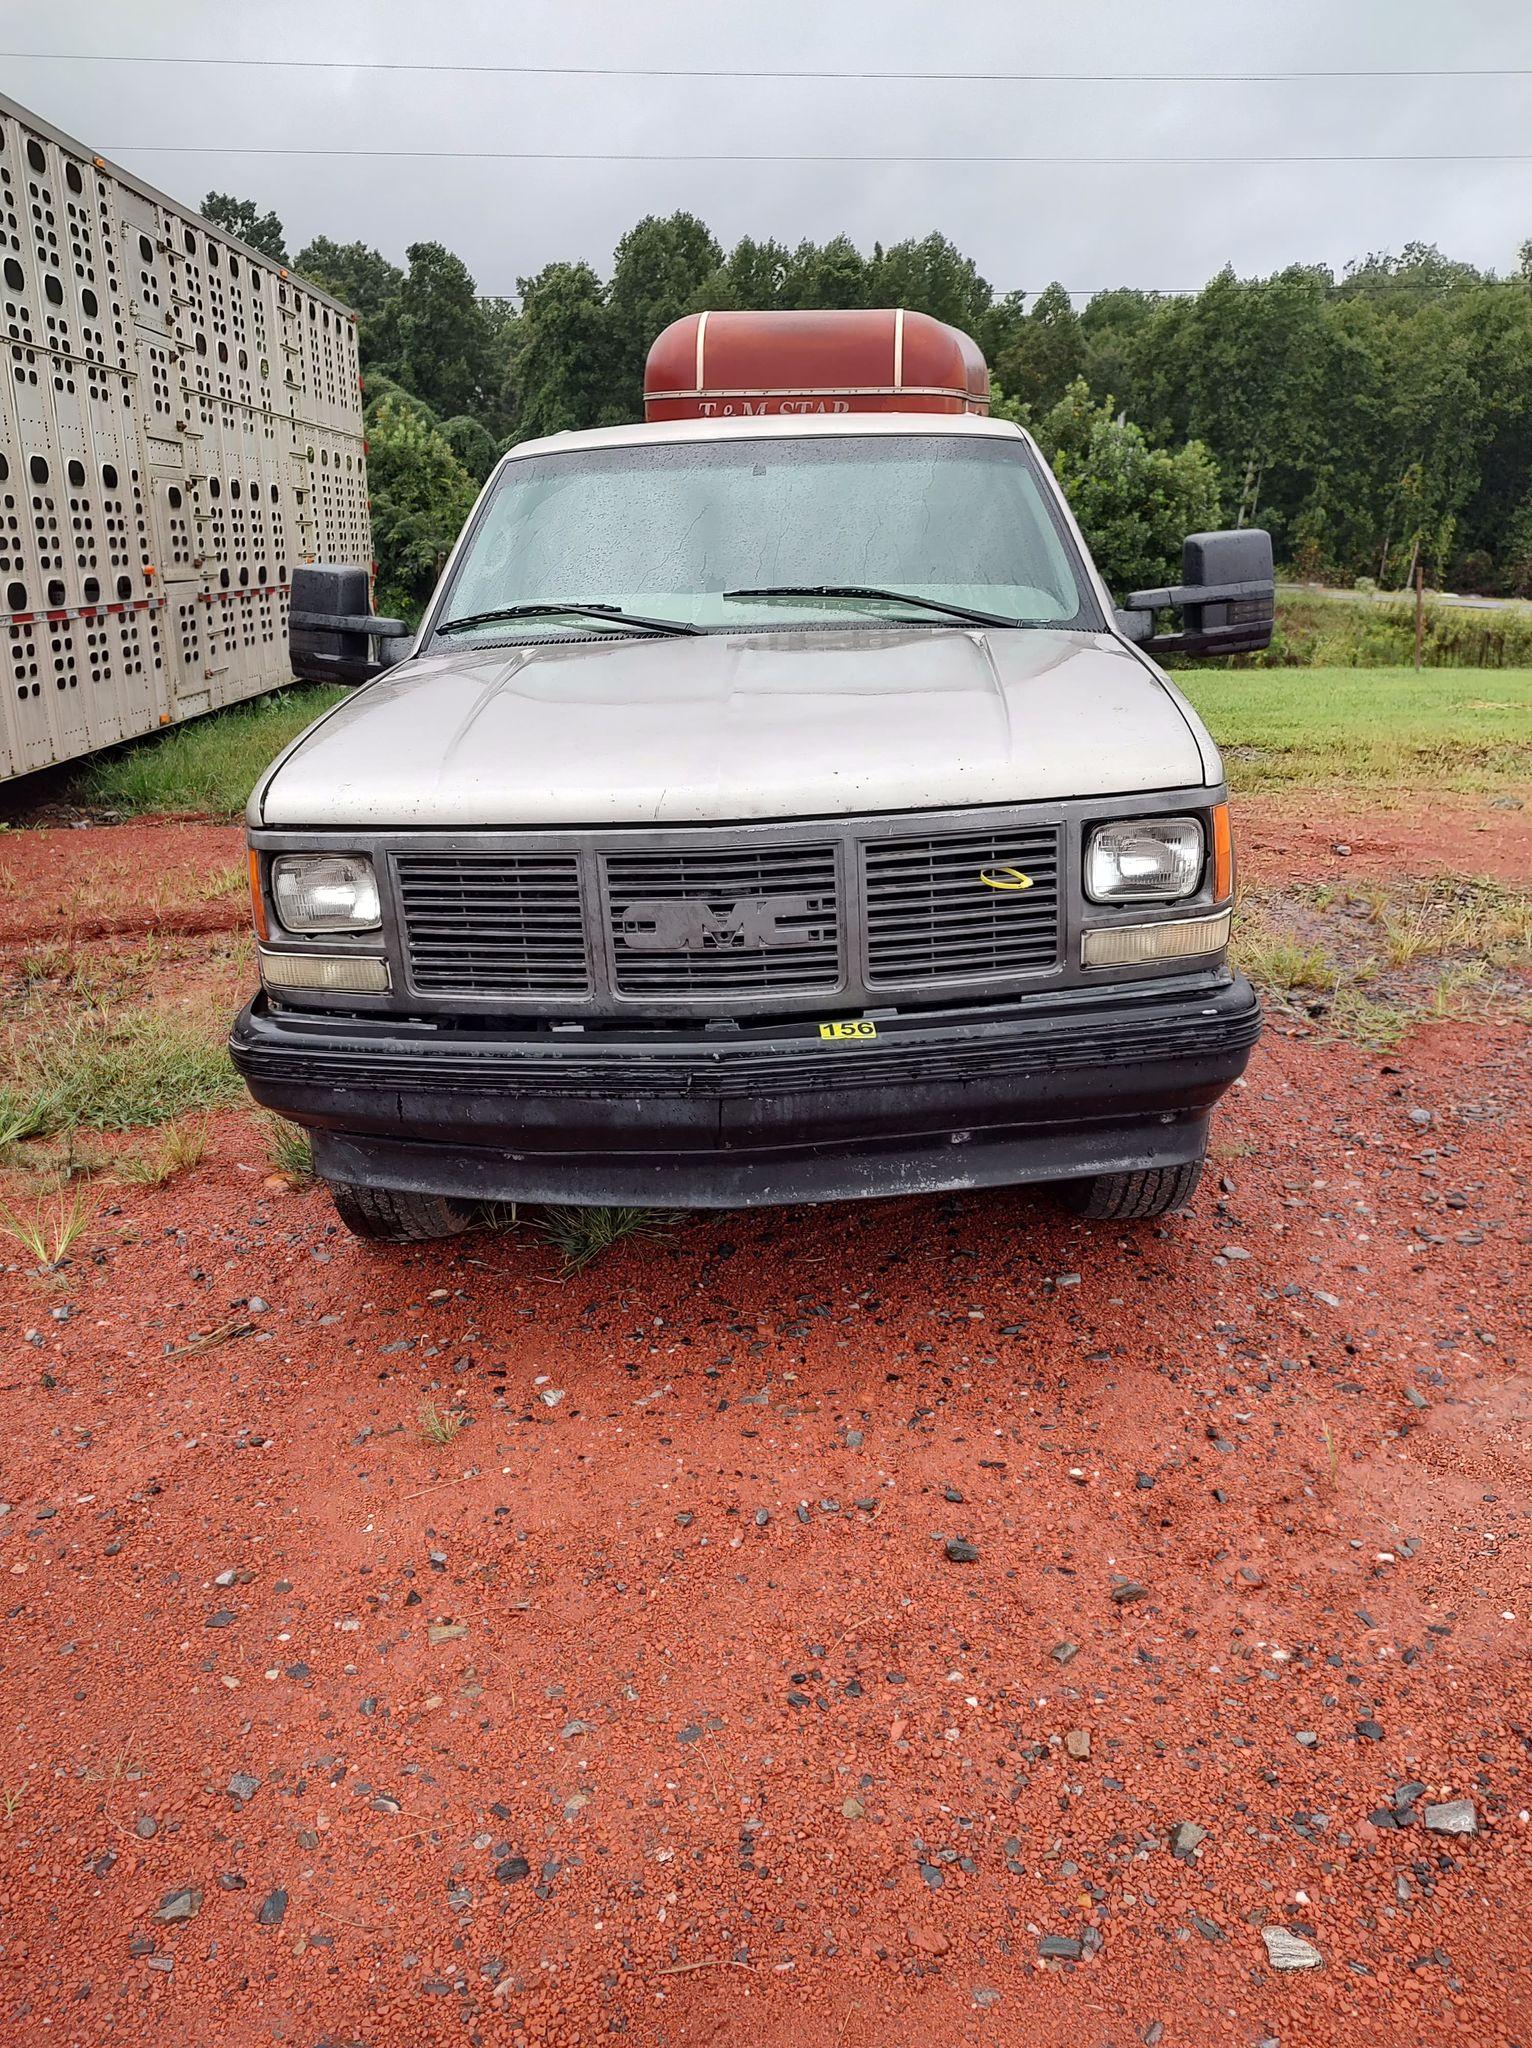 2000 MODEL CHEVY 3500 TRUCK, 432,888 MILES. HAS TITLE